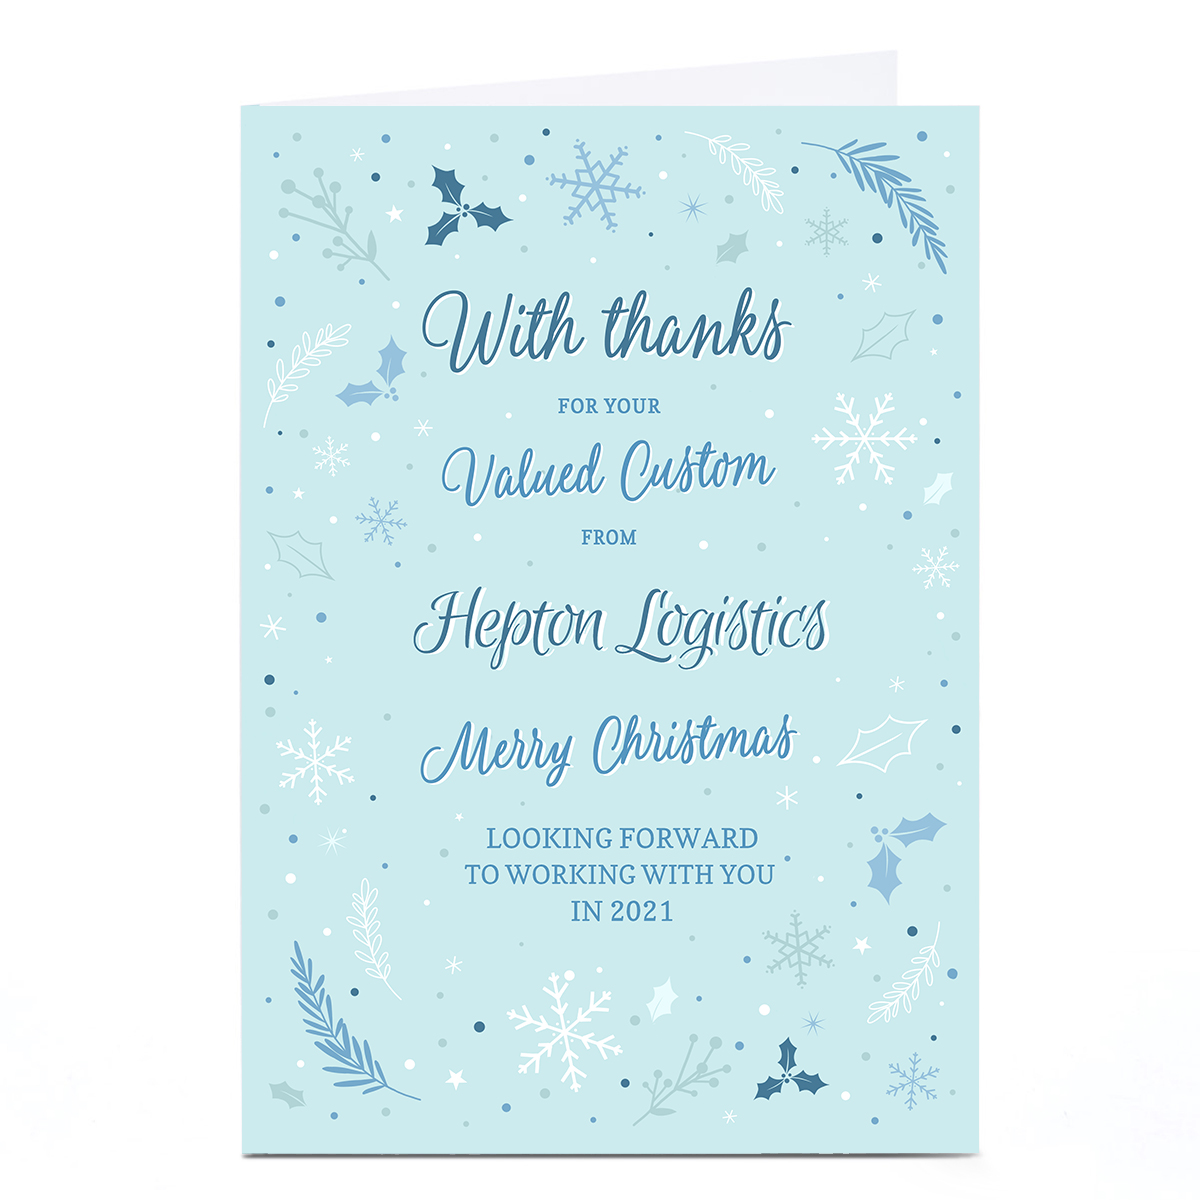 Personalised Business Christmas Card - With Thanks